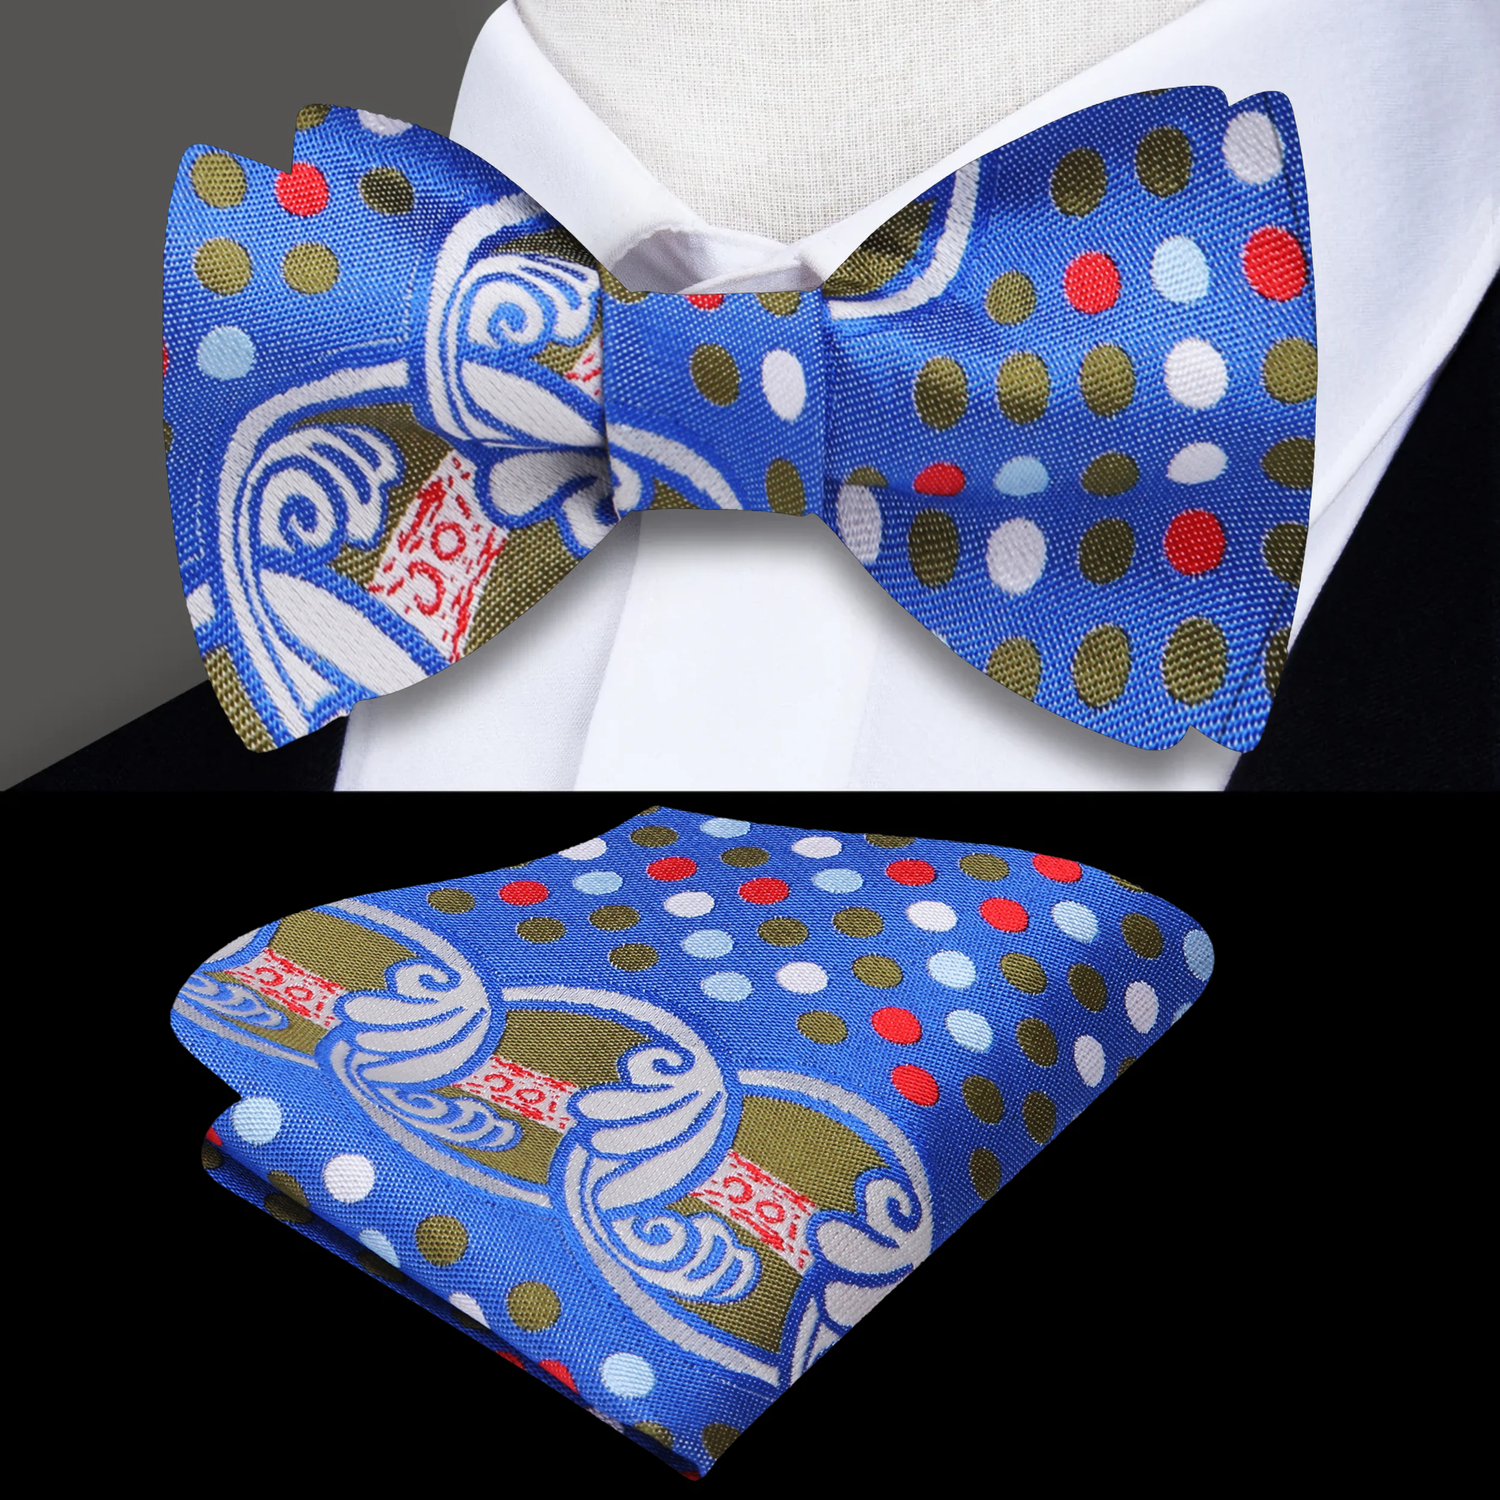 A White, Blue, Red, Green Wavy Circular Abstract with Dots Pattern Silk Self Tie Bow Tie, With Matching Pocket Square